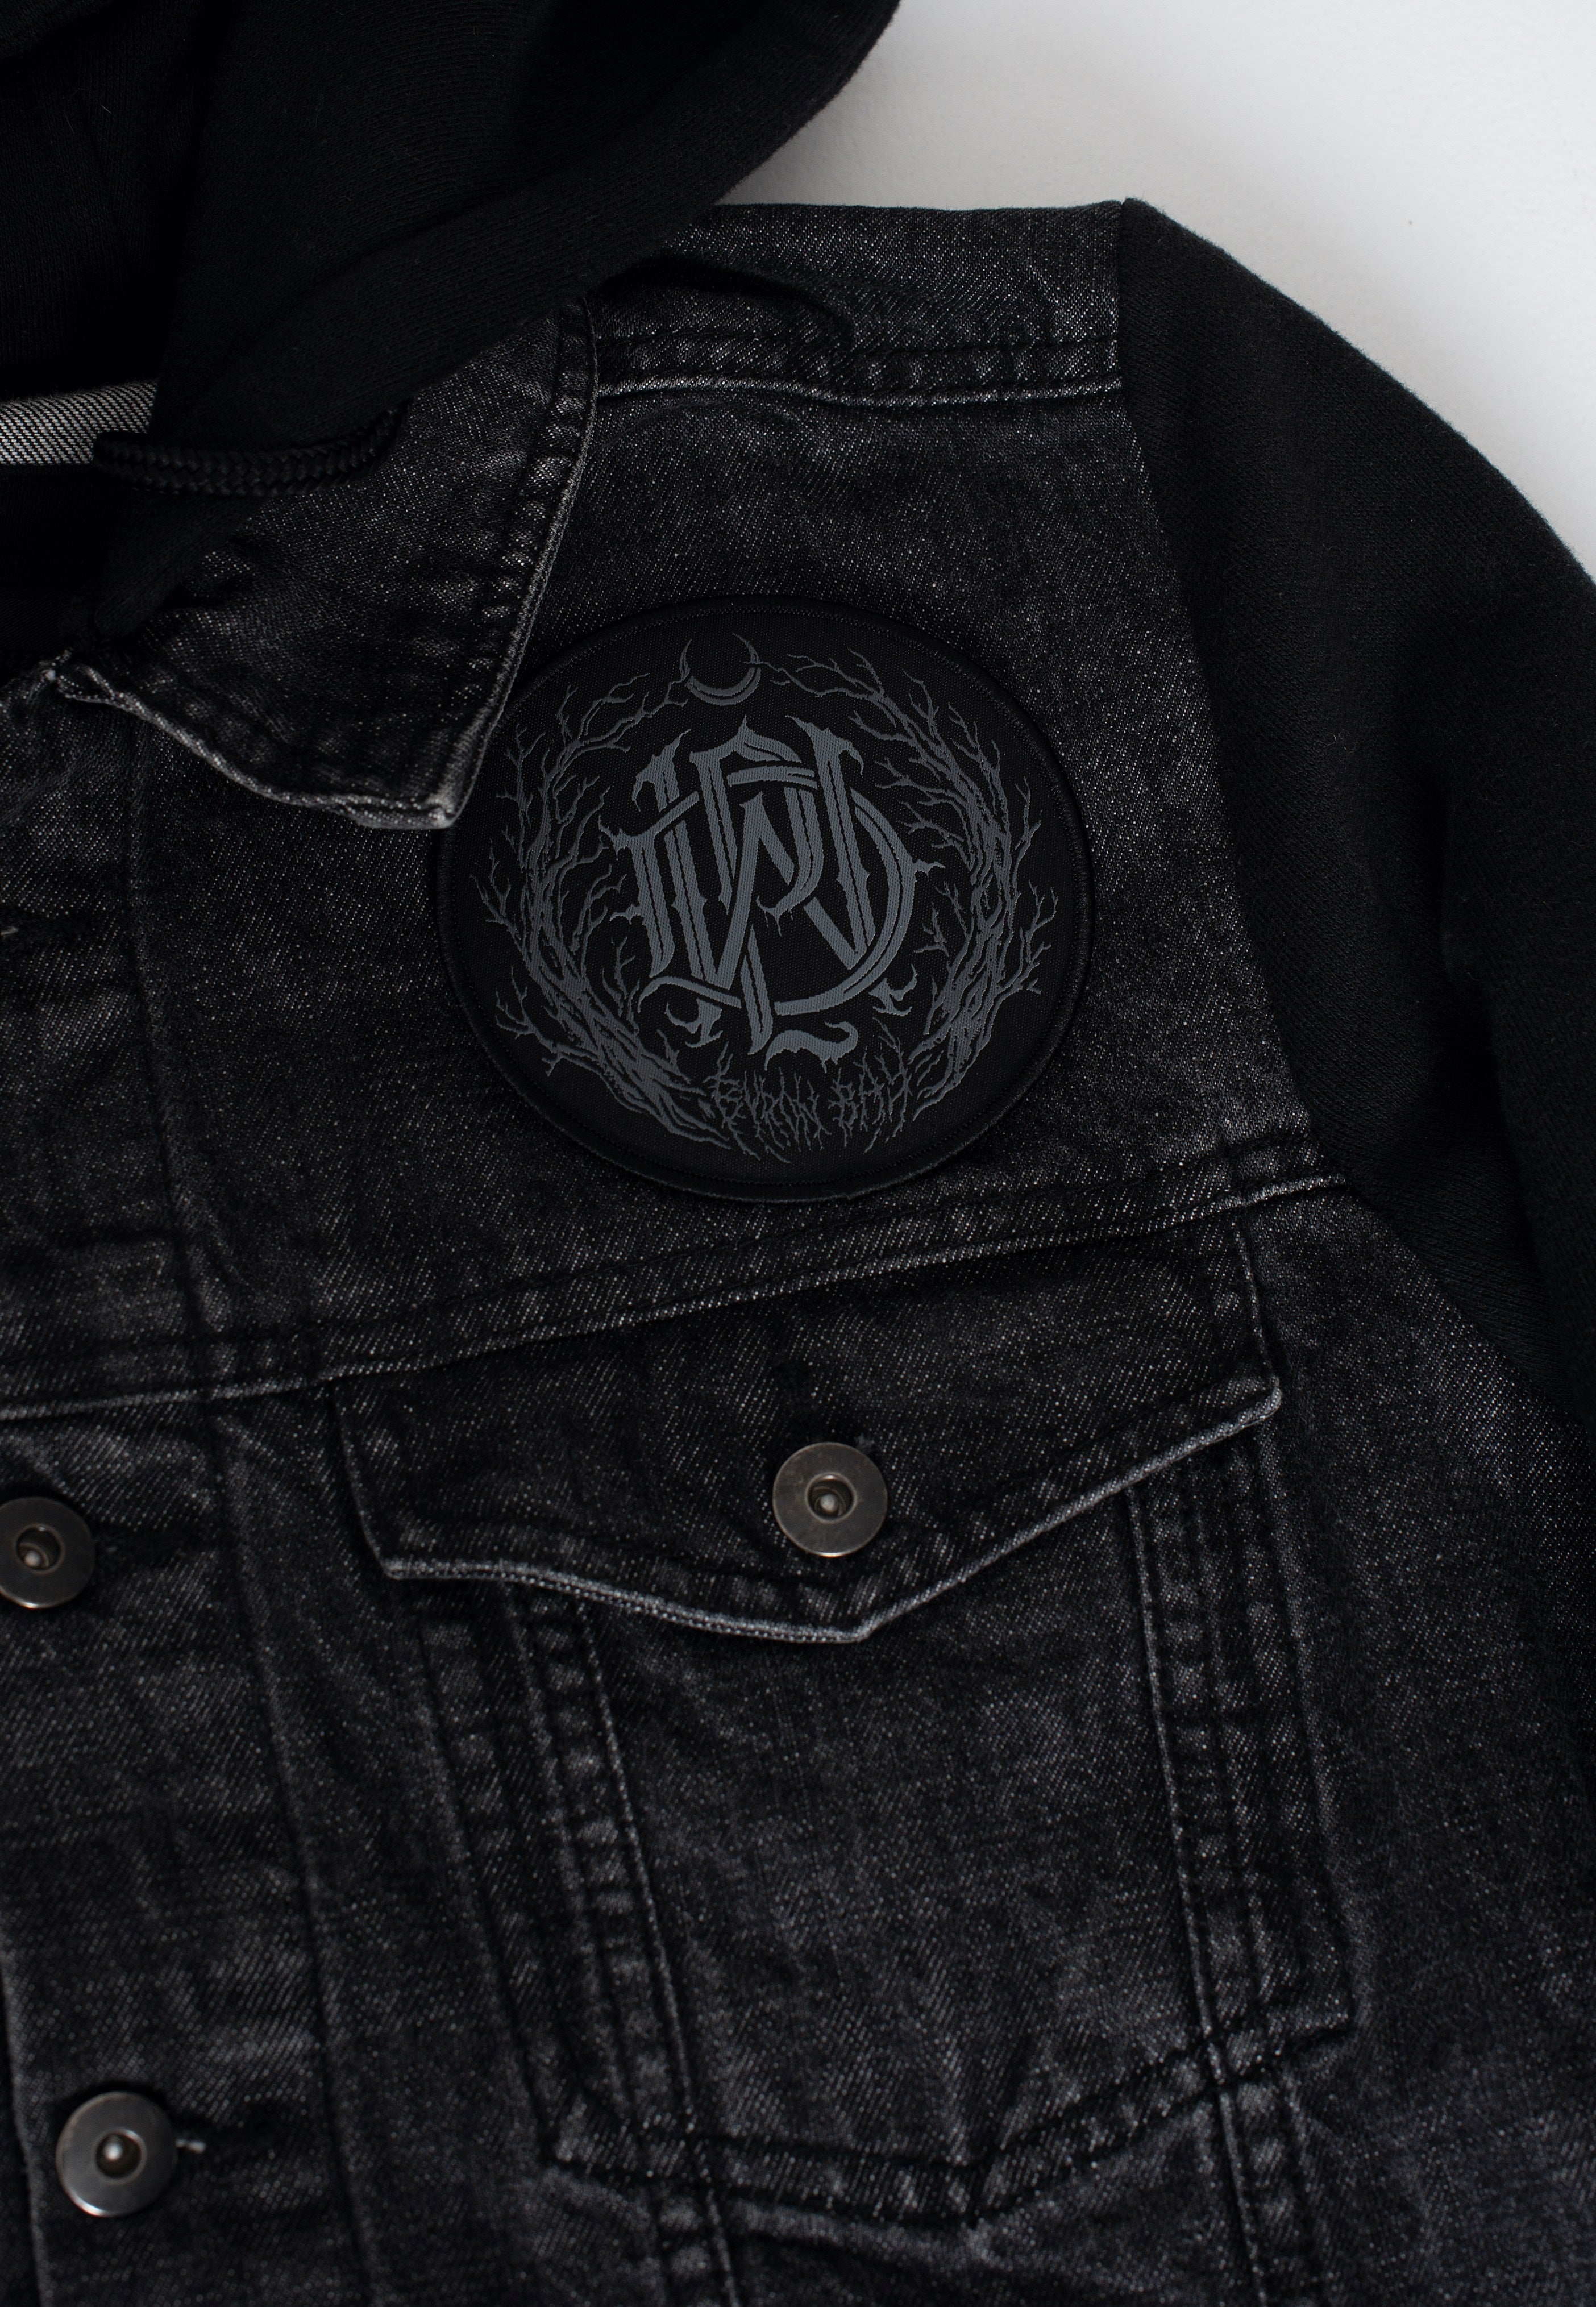 Parkway Drive - Metal Crest - Patch